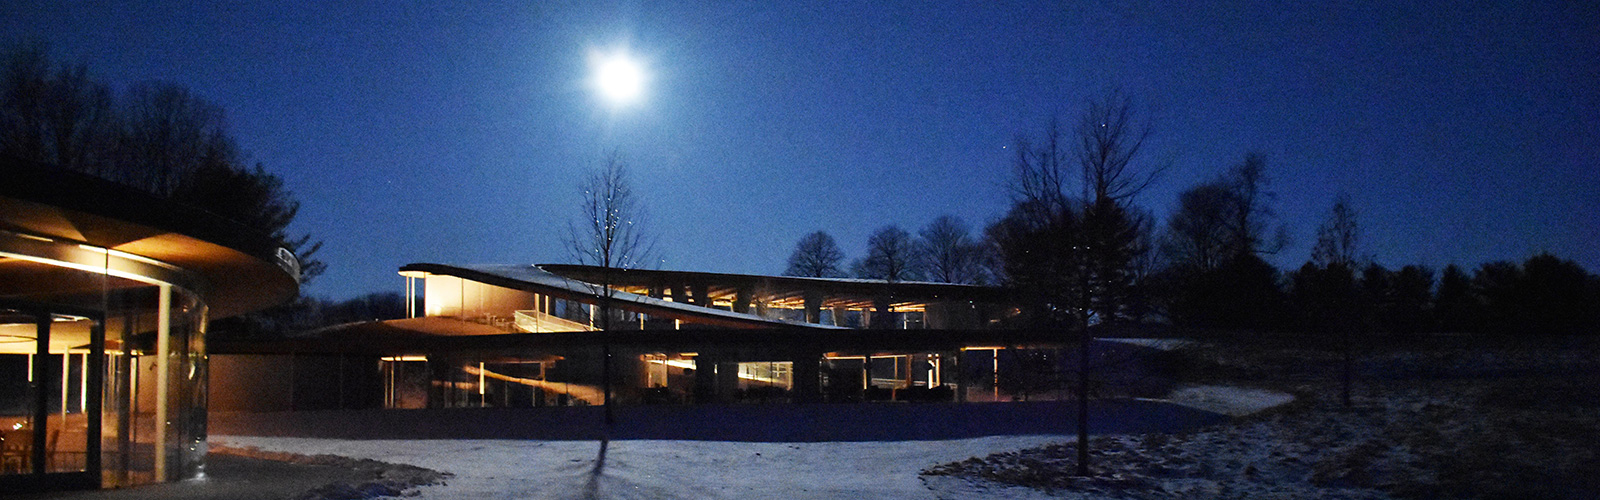 Winter full moon over the River building at Grace Farms